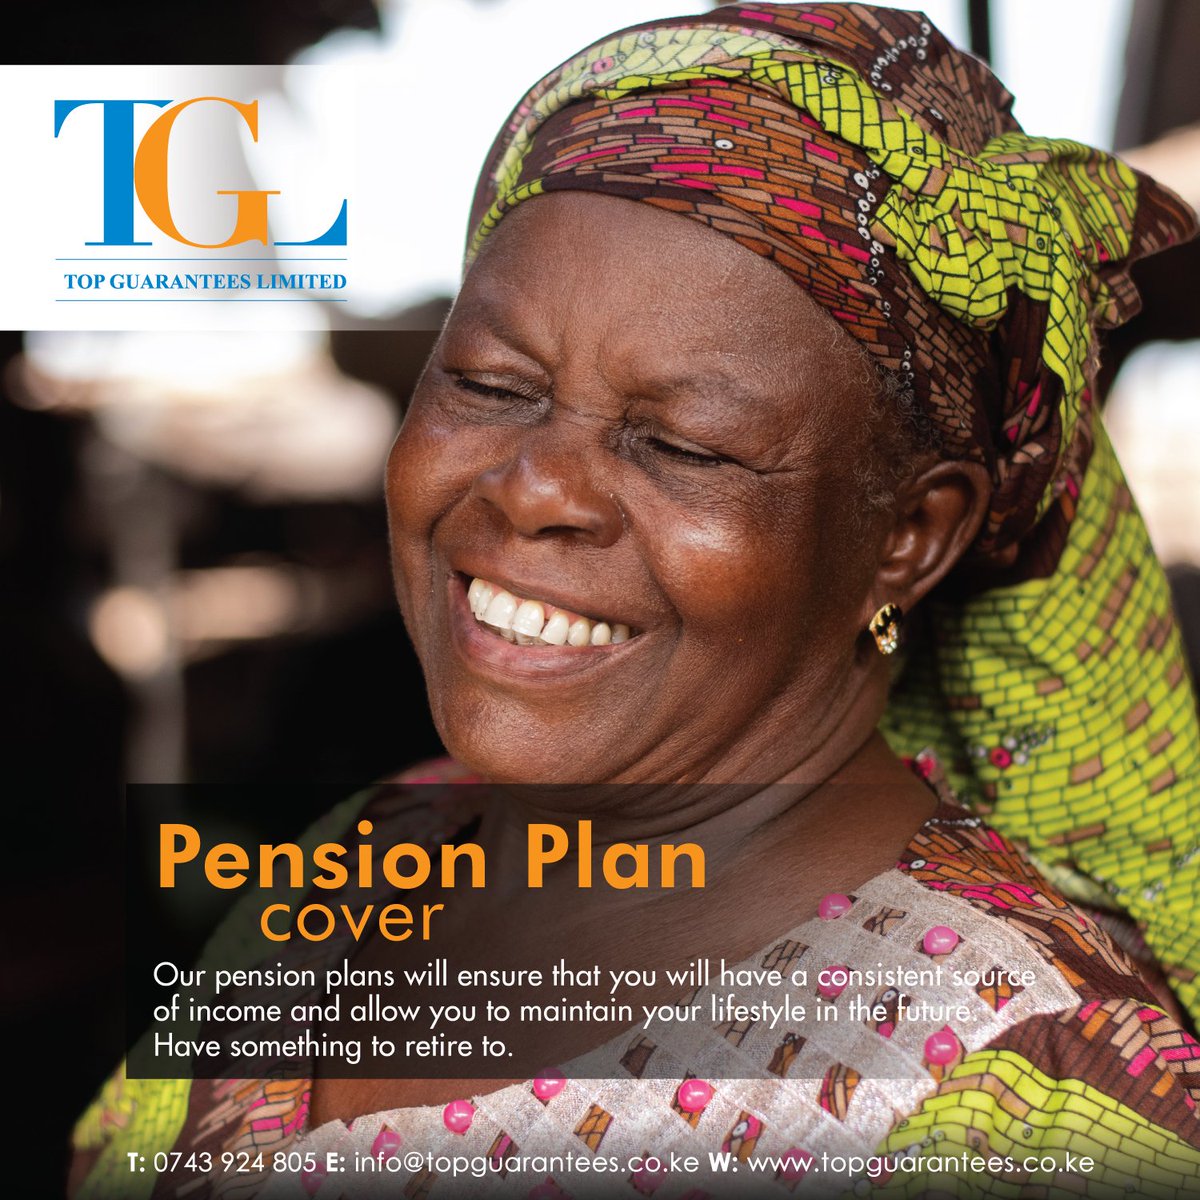 Our pension plans will ensure that you will have a consistent source of income and allow you to maintain your lifestyle in the future. Have something to retire to.

#pensioninsurance